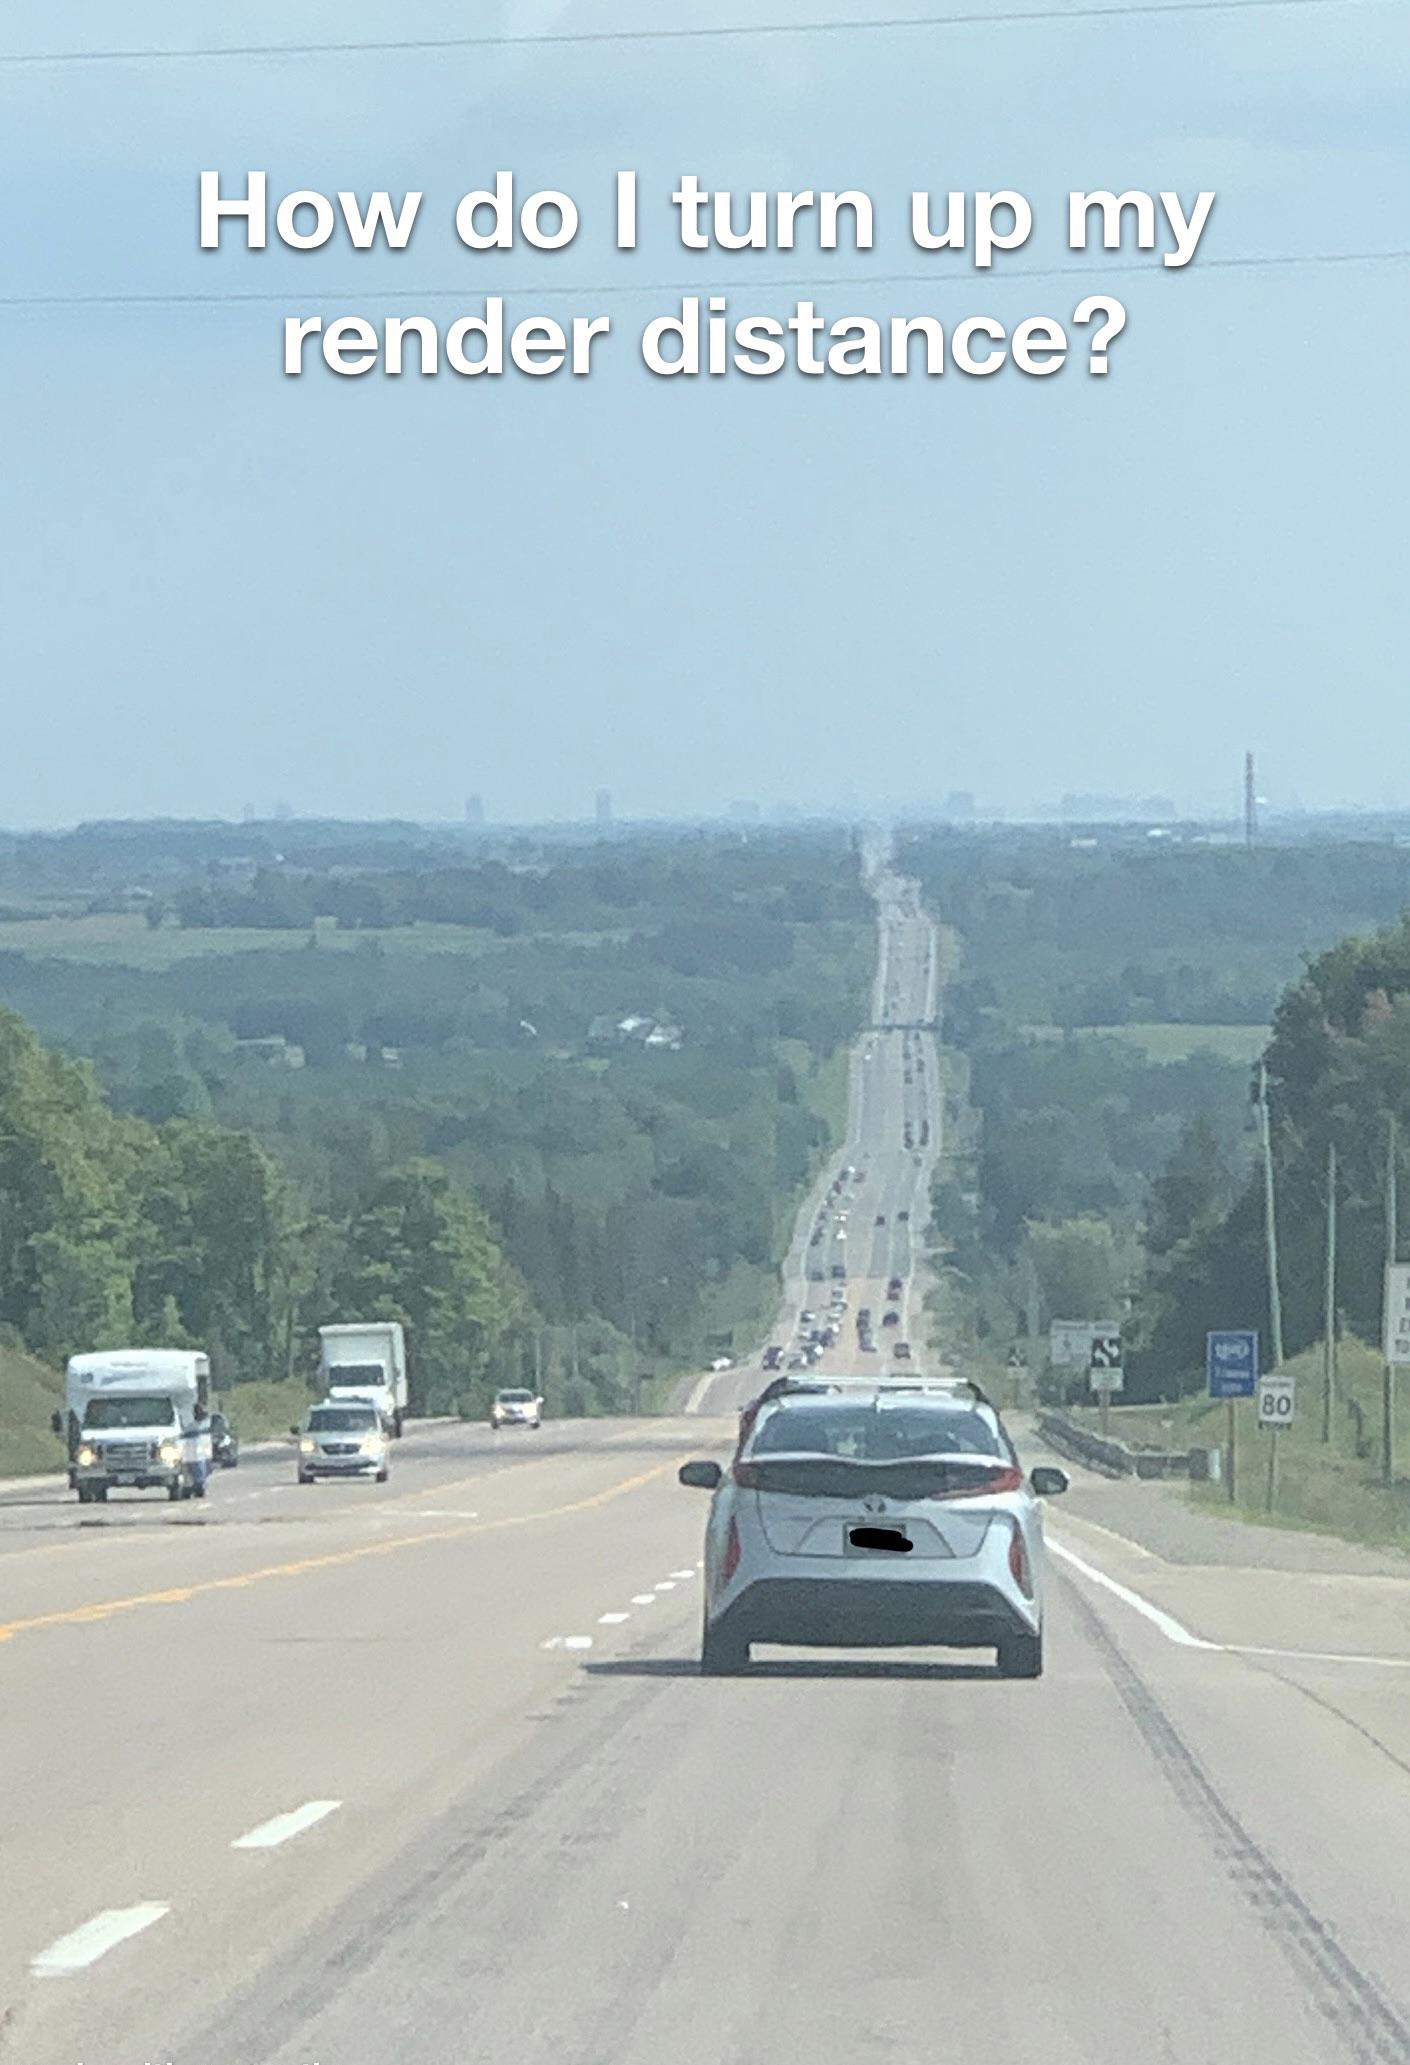 lane - How do I turn up my render distance? 80